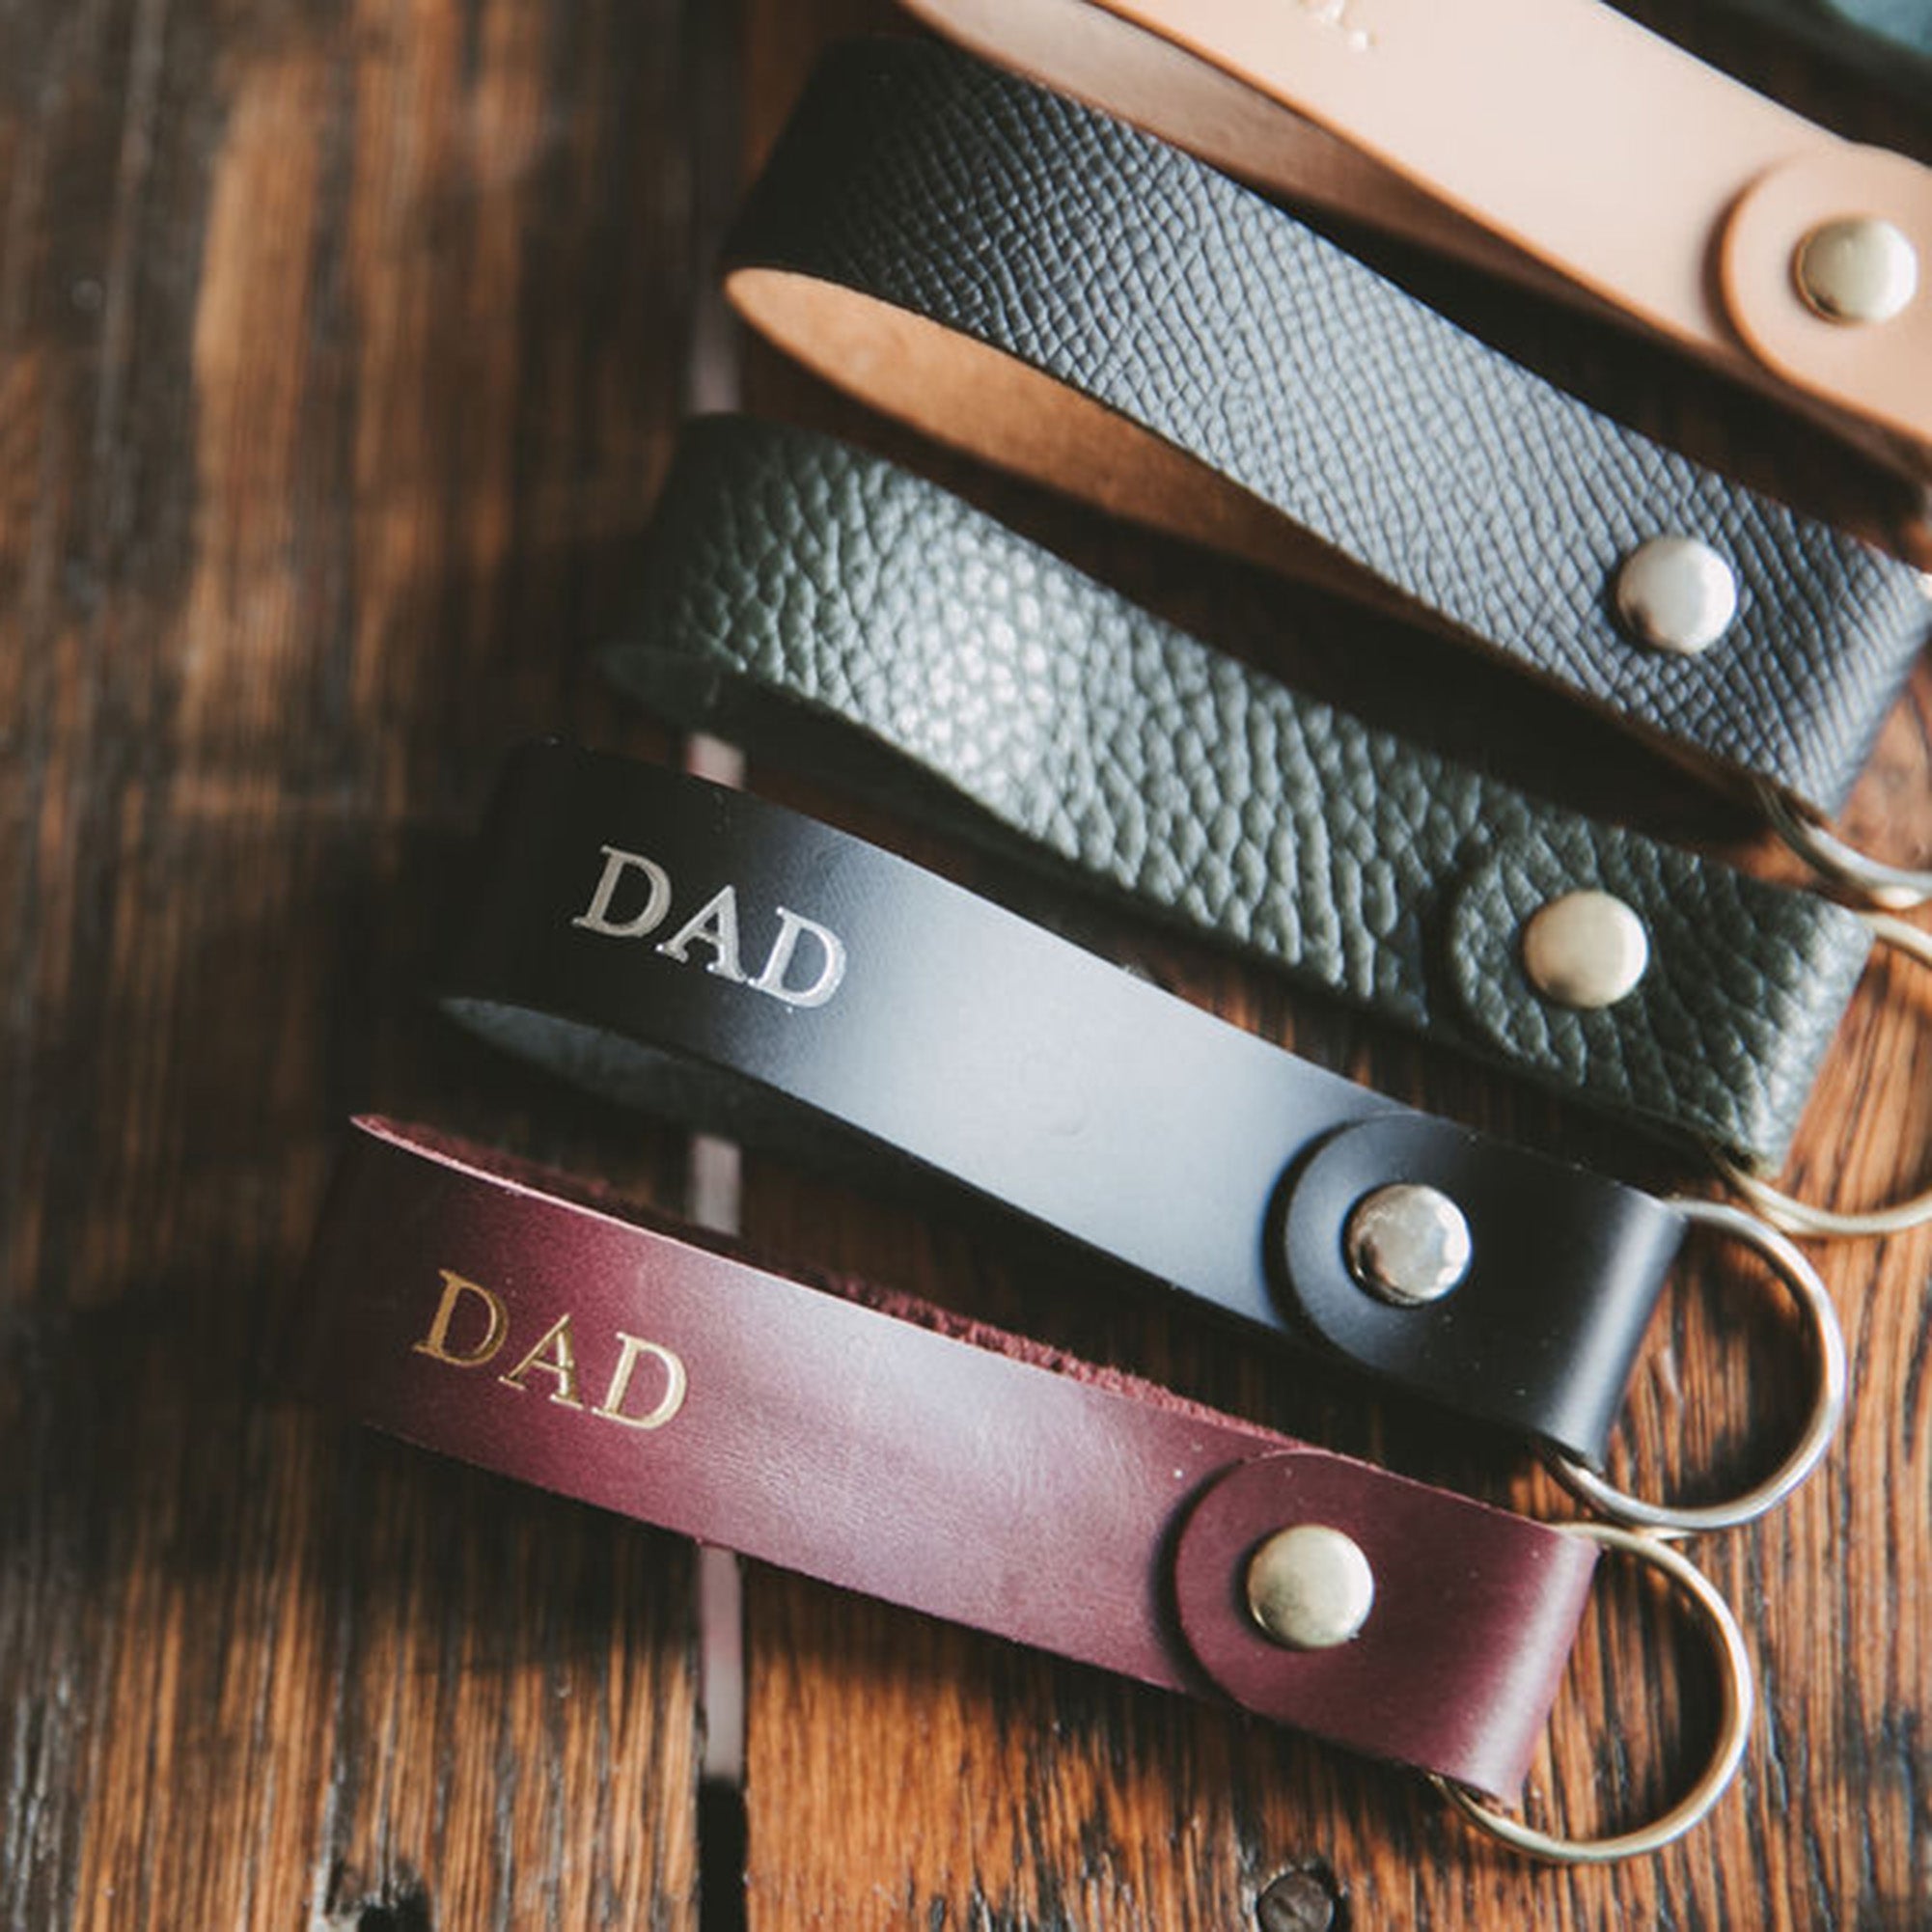 Brown and black personalised leather keyrings for Dad